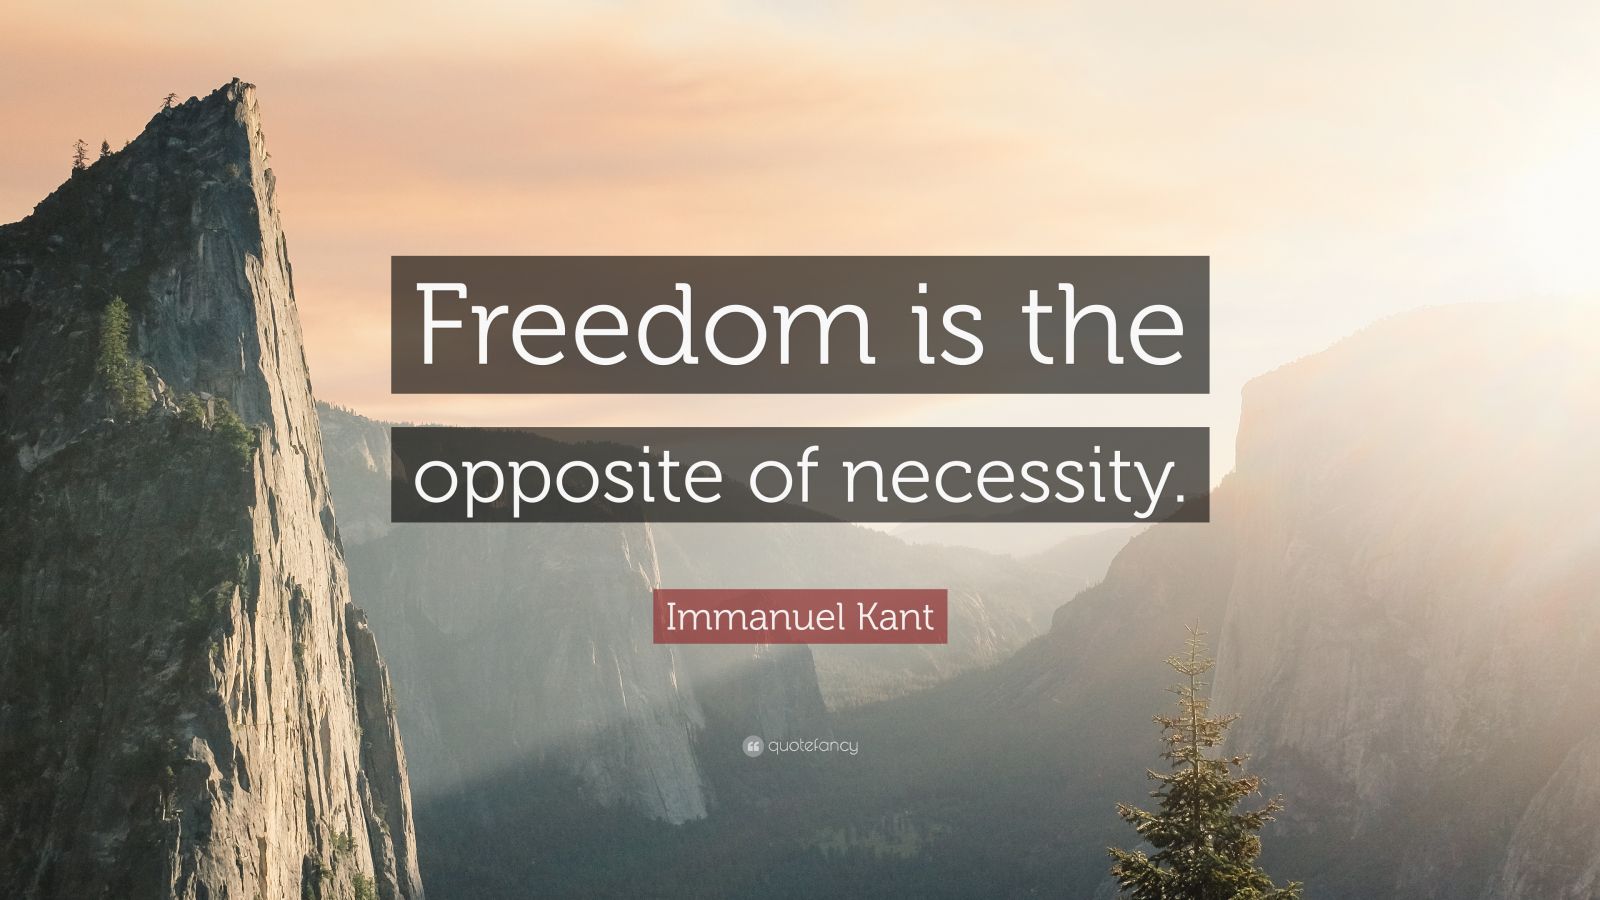 Immanuel Kant Quote: “Freedom is the opposite of necessity.”